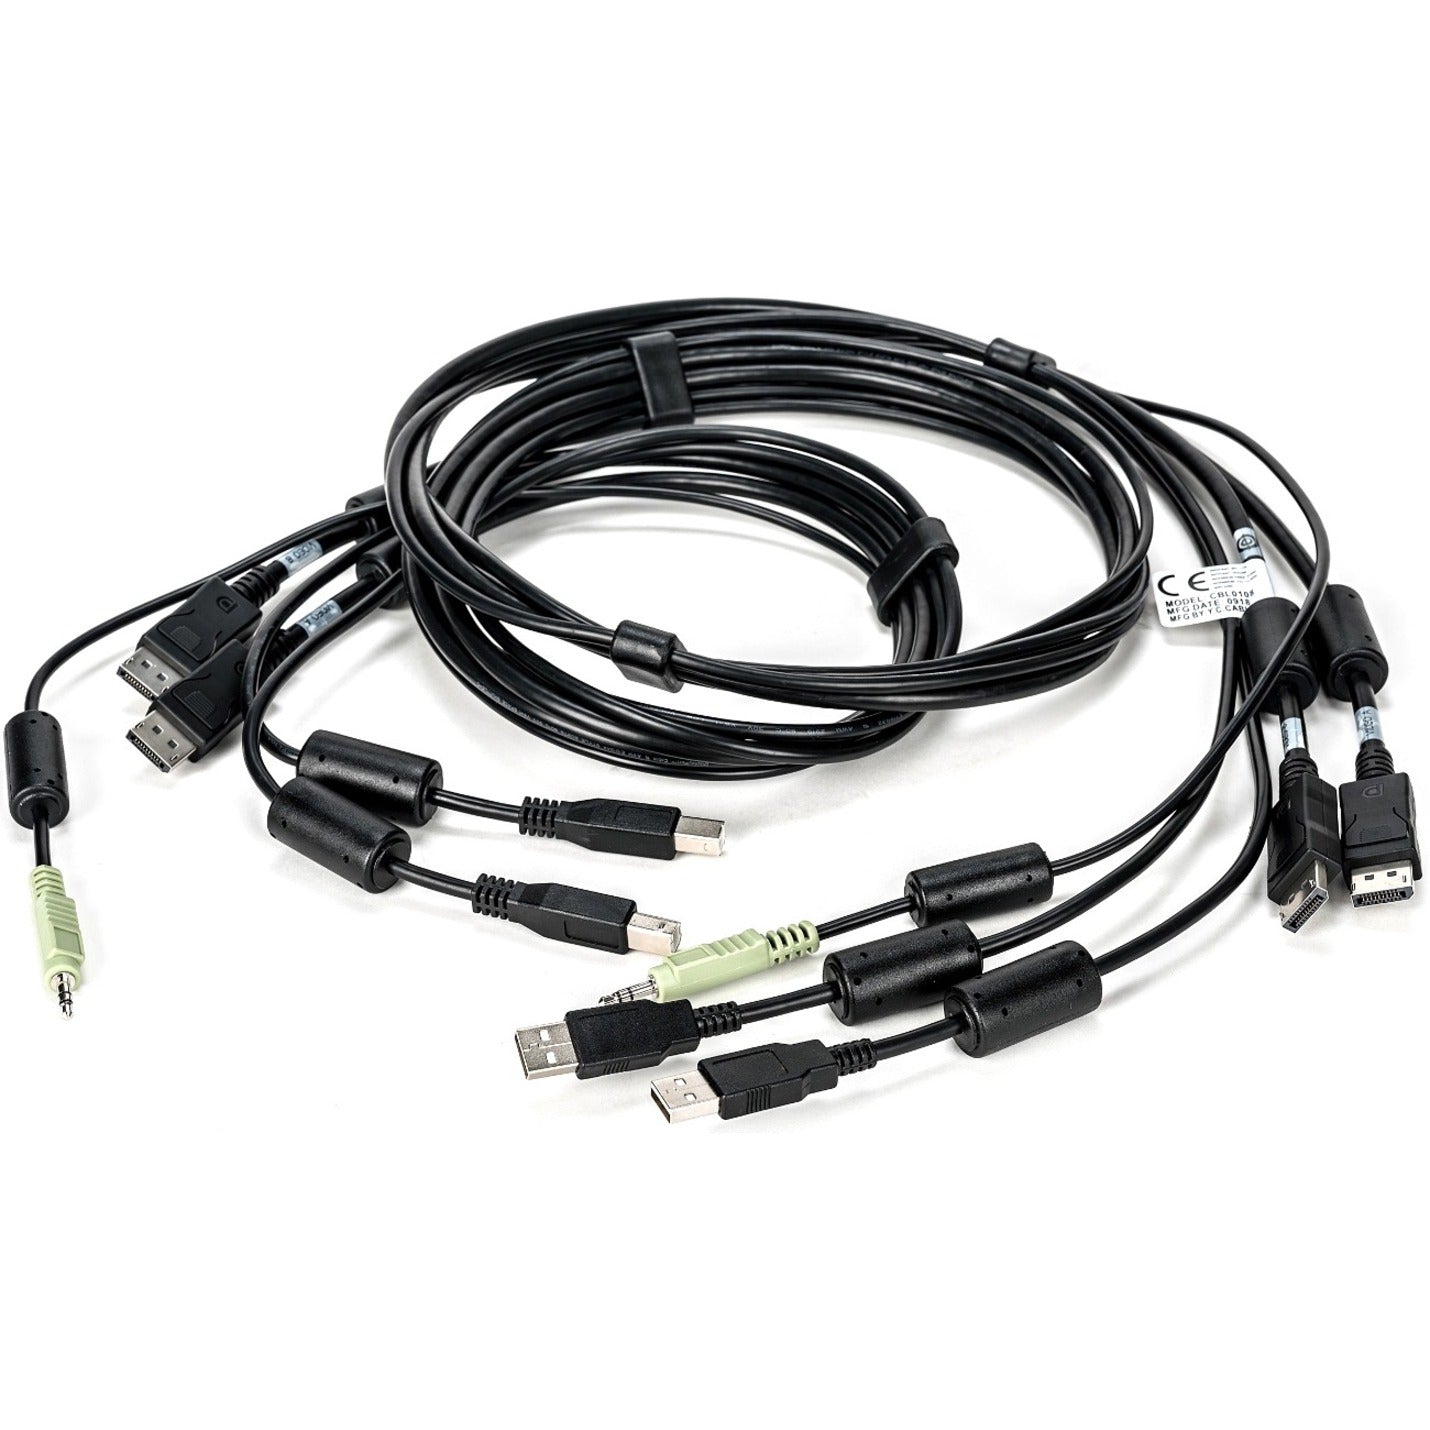 AVOCENT CBL0108 SC945D Cable - 6ft, Dual USB Keyboard and Mouse, Dual DisplayPort and Audio Cable